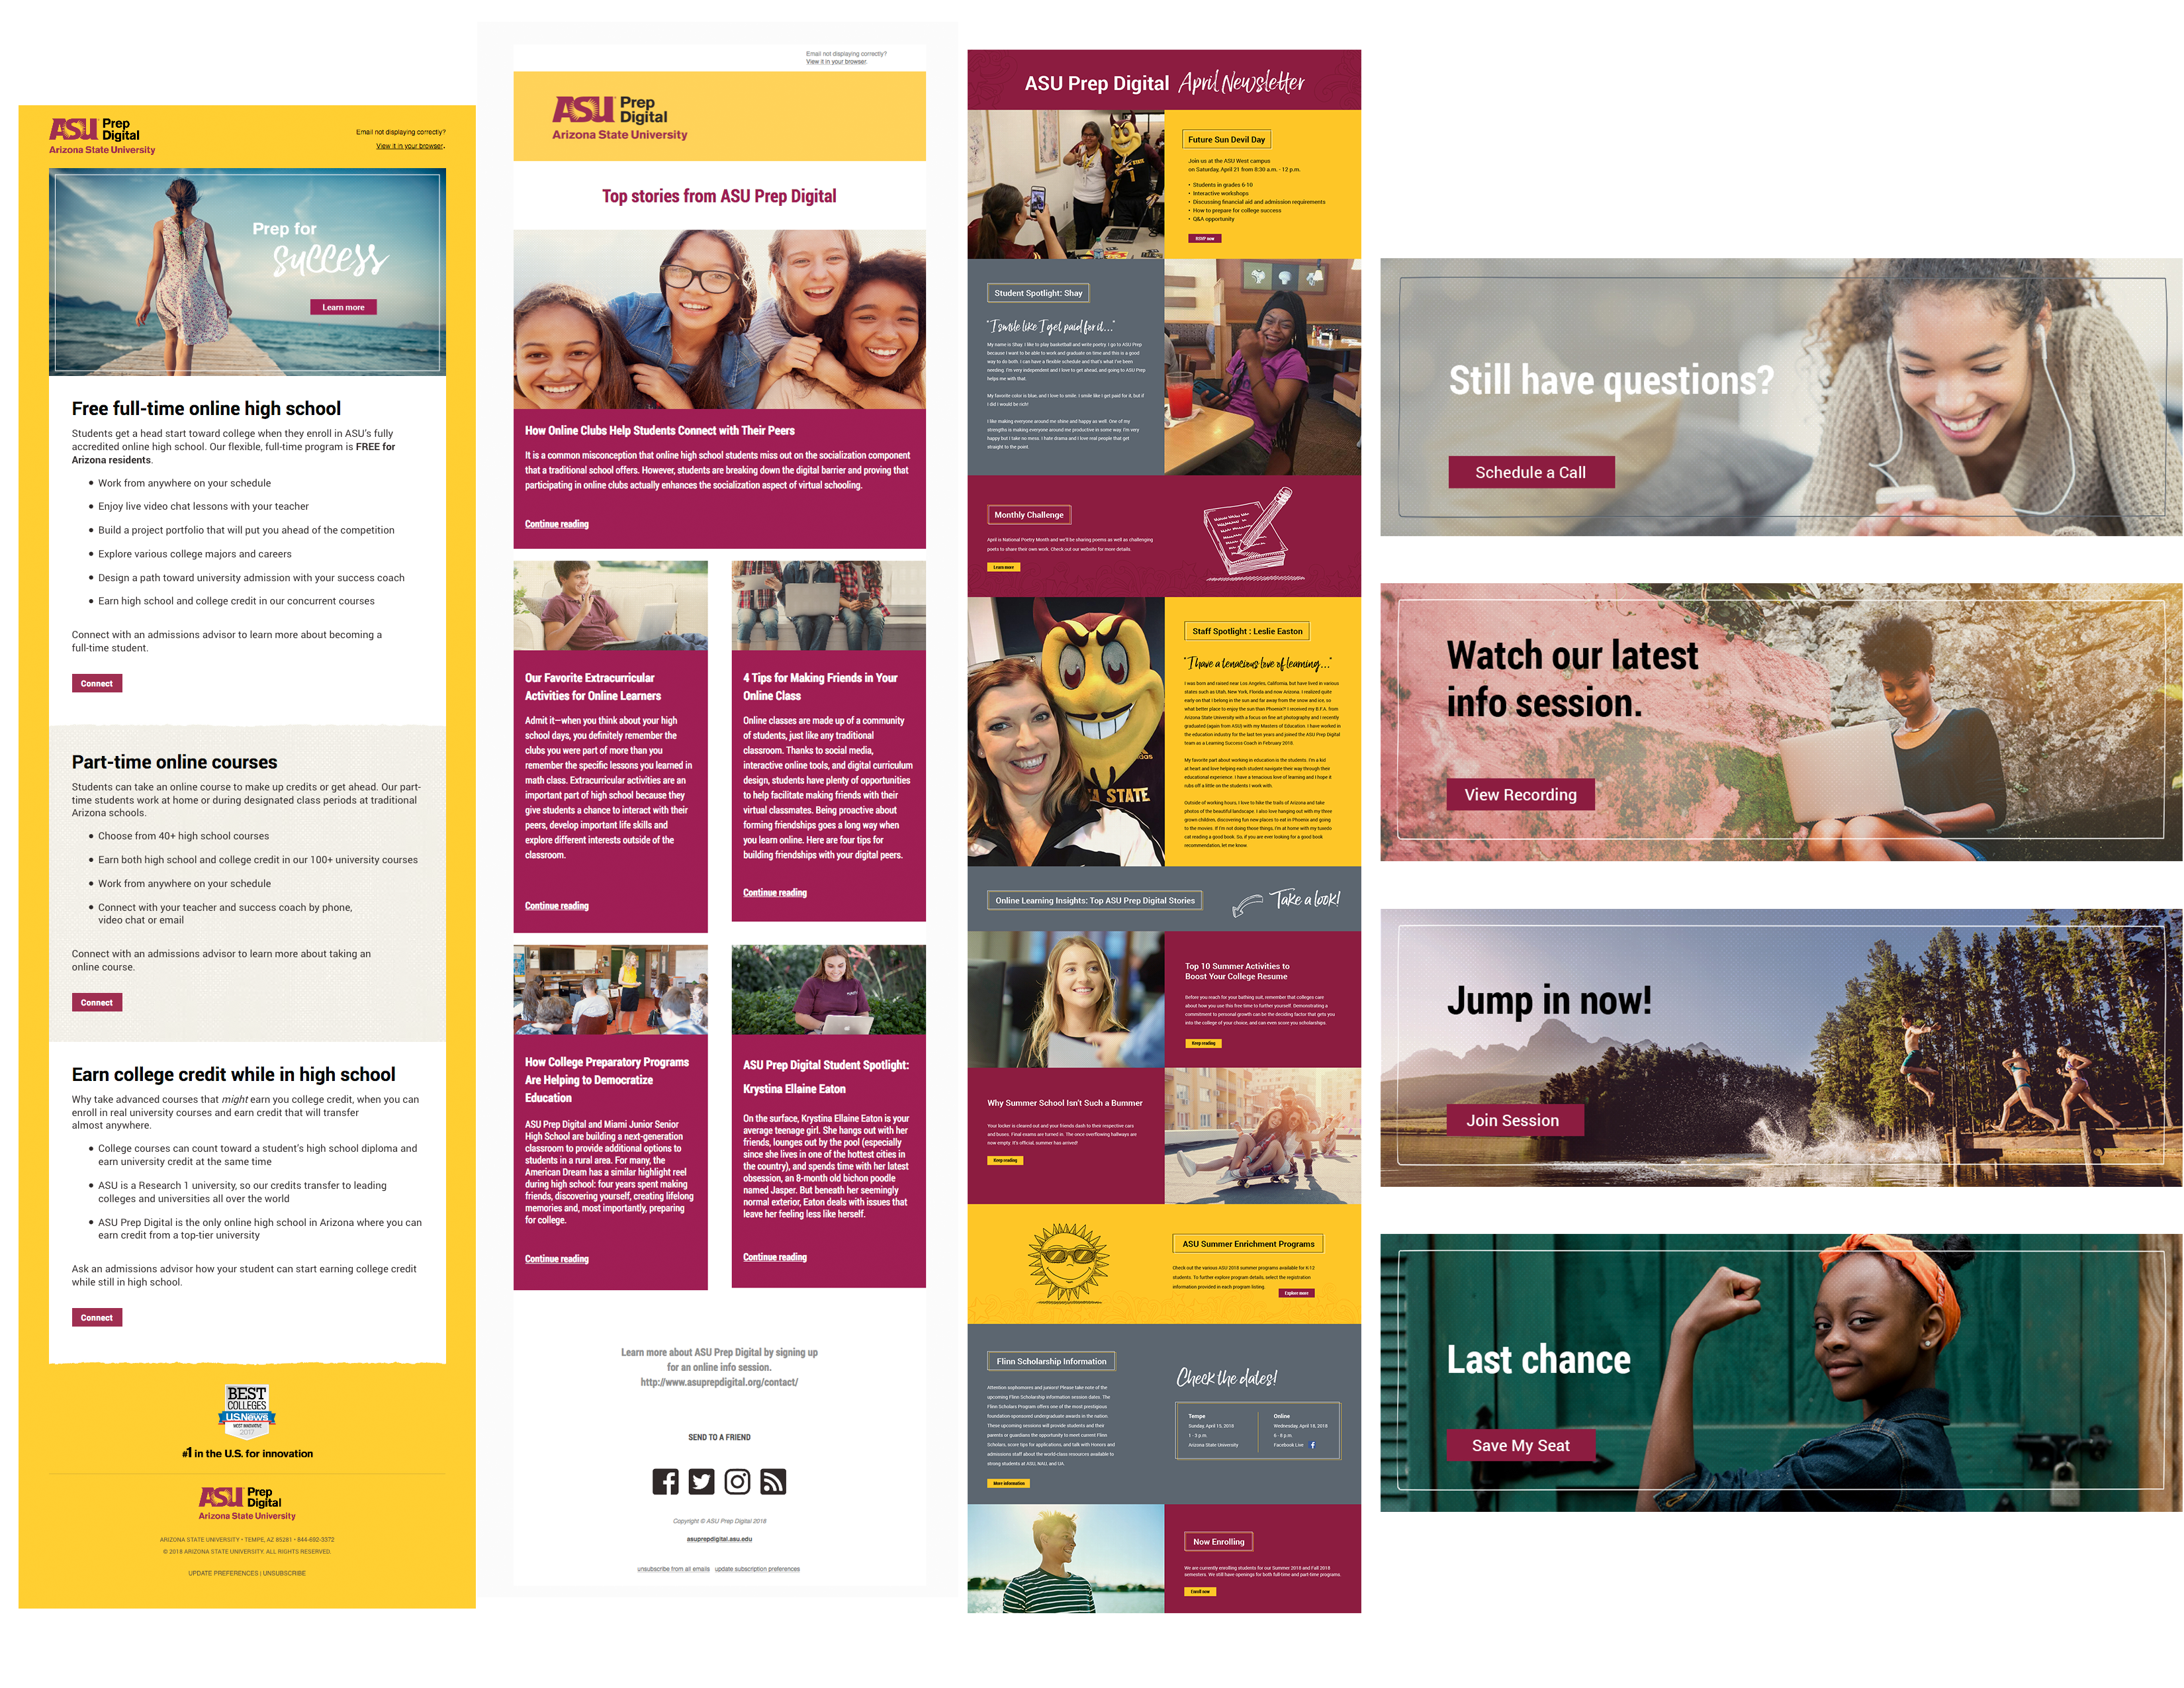 HTML email development and banner design for an online high school and college prep.